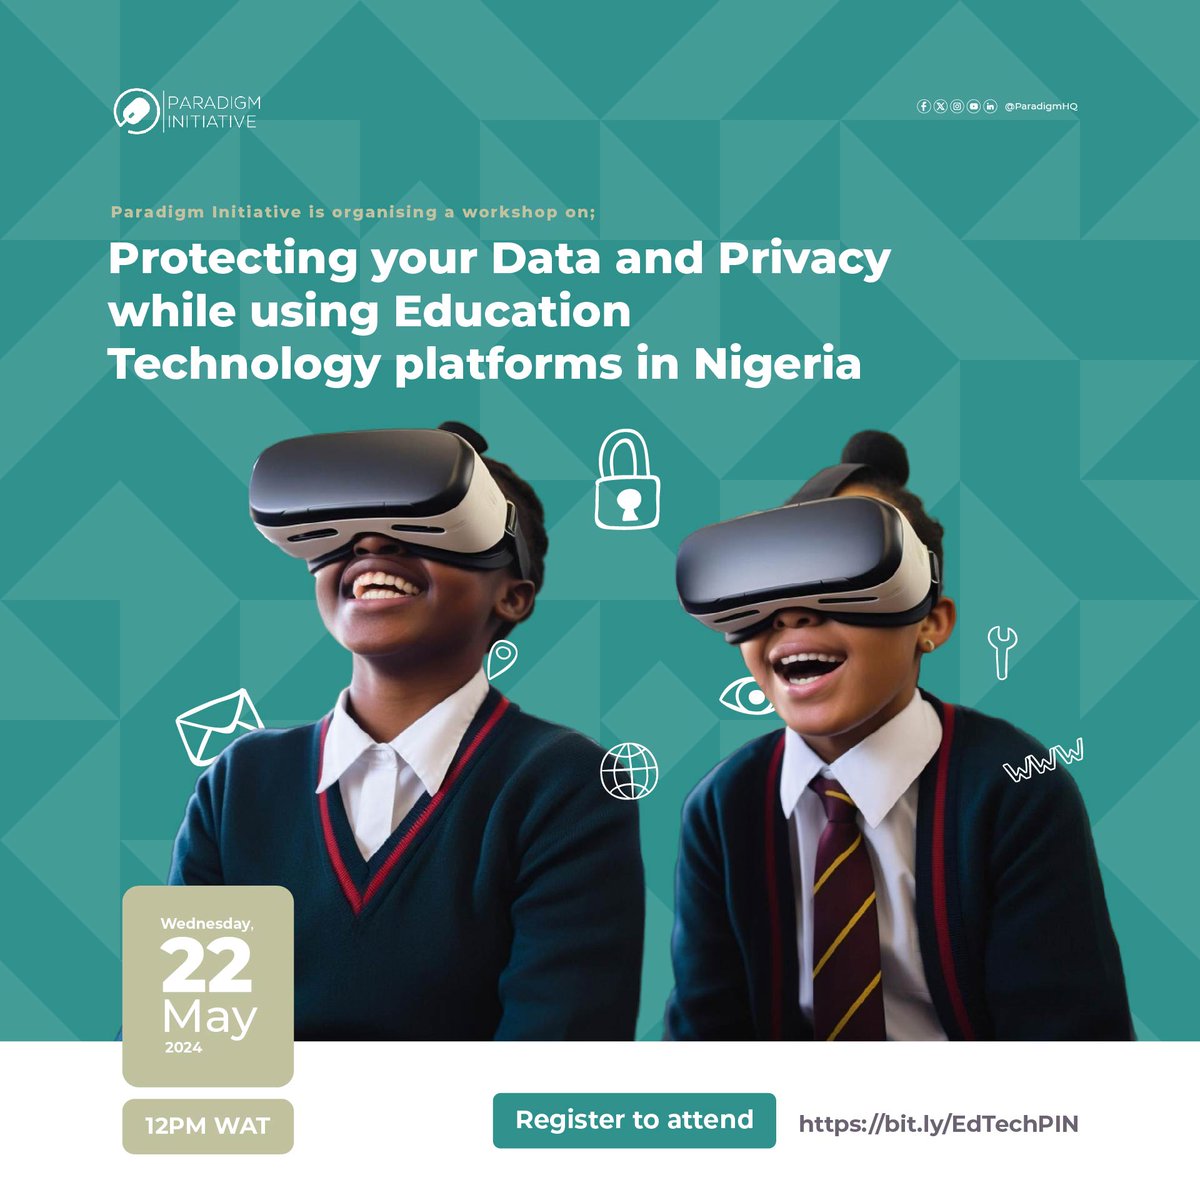 📢 Webinar Announcement 📢 The rapid growth of Educational Technology (EdTech) platforms in Nigeria has opened up new possibilities for enhancing learning outcomes and educational access. Accelerated by the COVID-19 pandemic, many schools and state governments turned to online